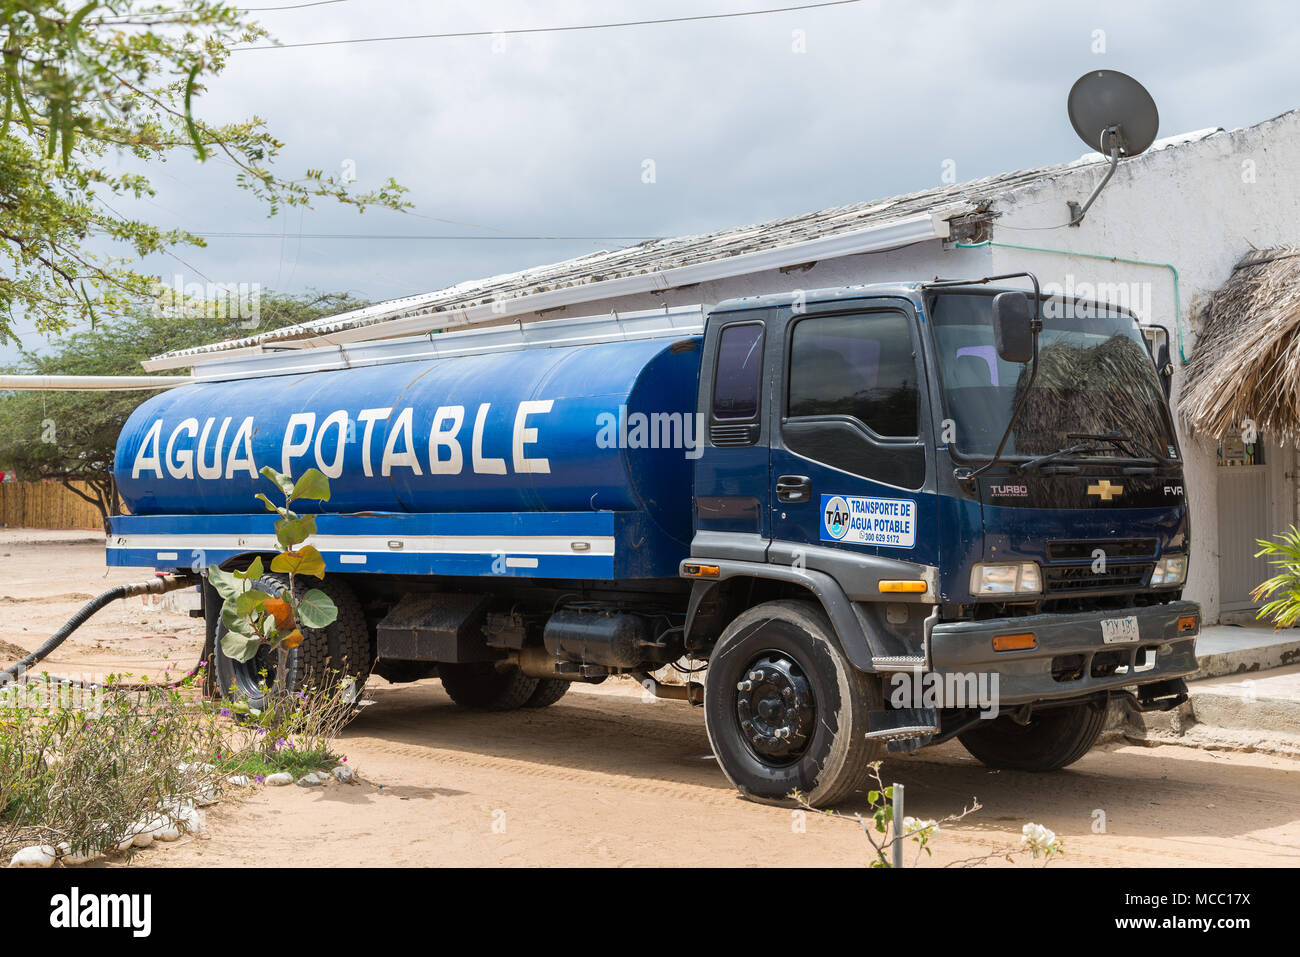 Truck delivers potable water to residents in rural area. Colombia, South America. Stock Photo